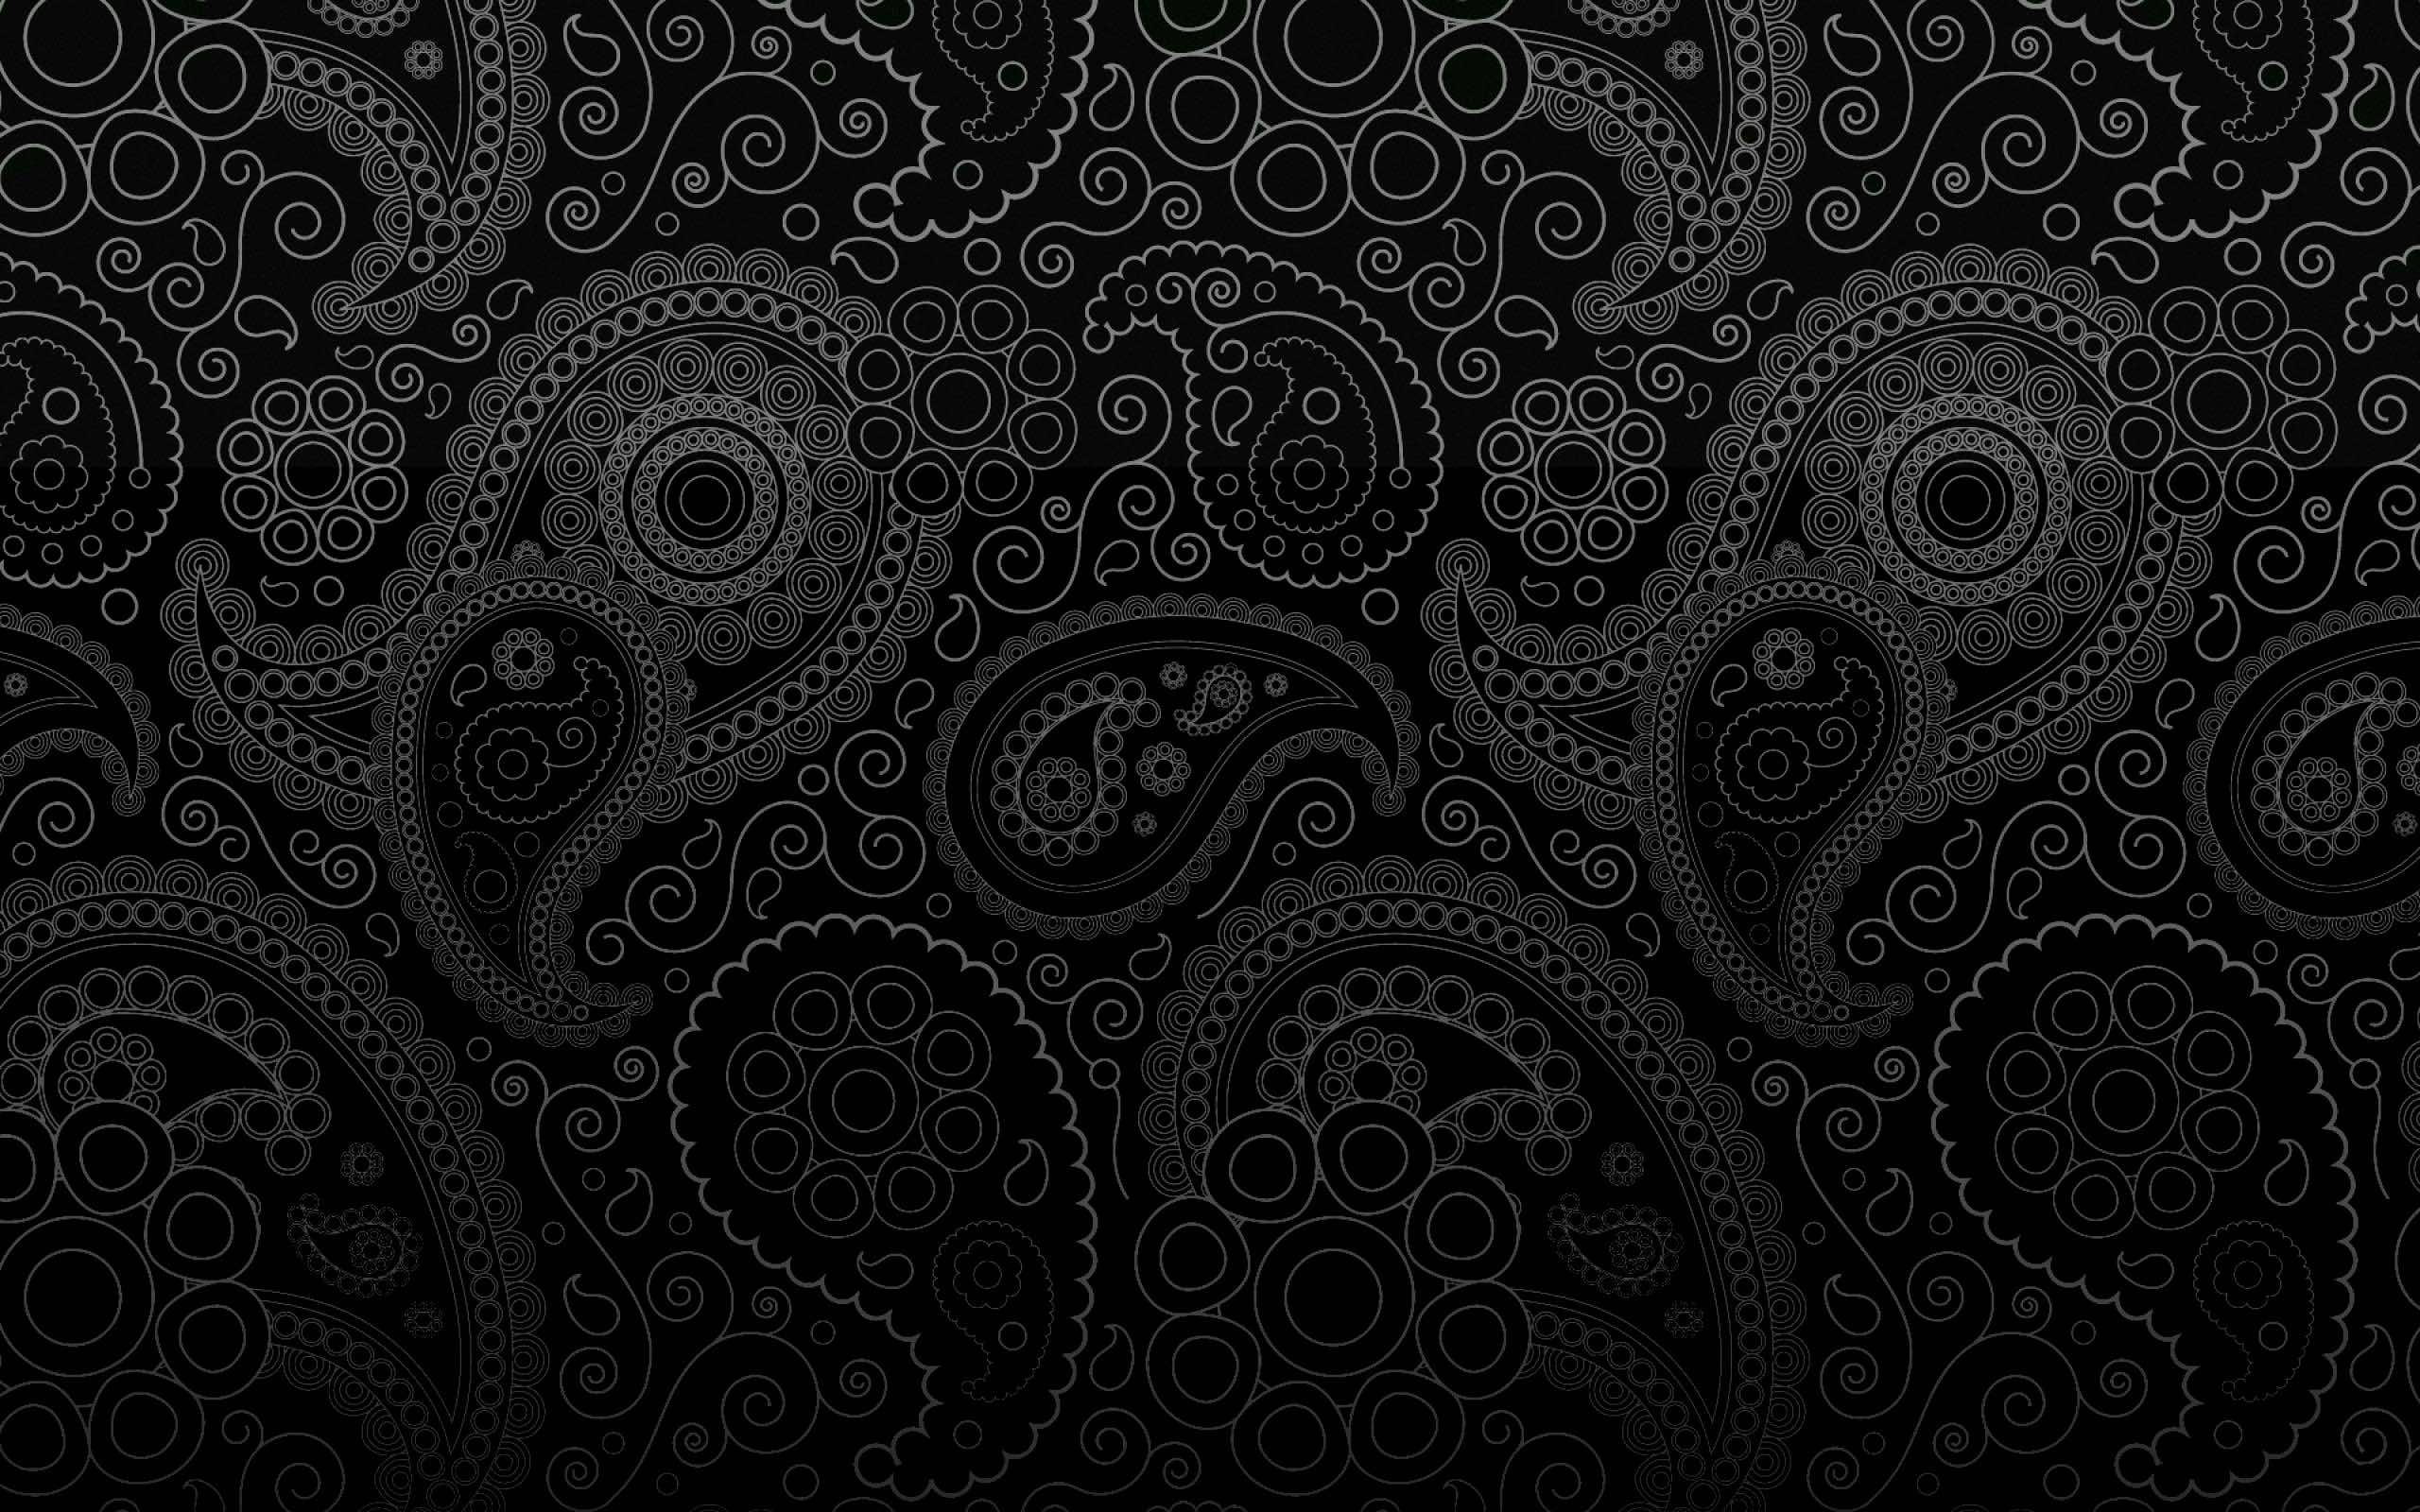 50 Black Wallpaper In FHD For Free Download For Android, Desktop and